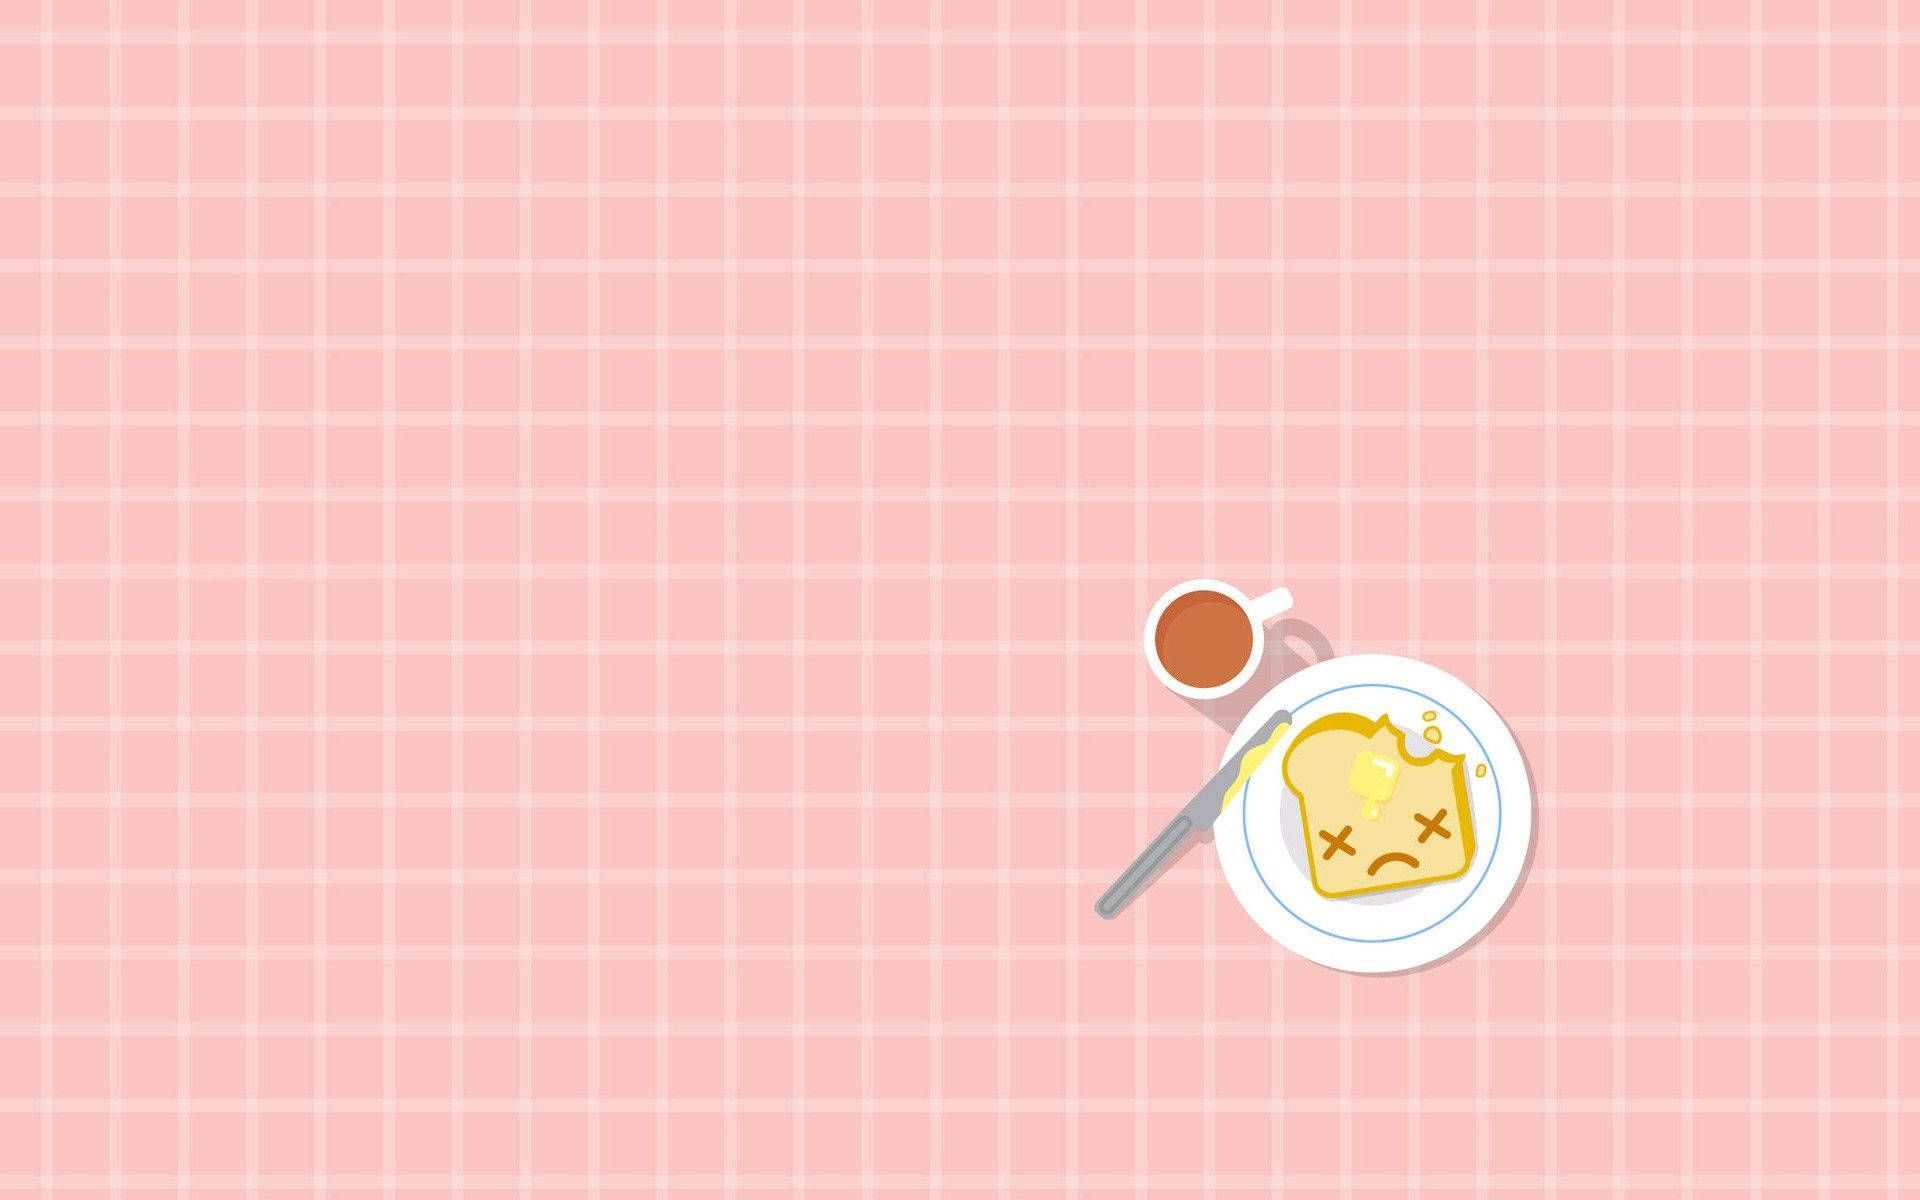 A pink background with an image of food - Food